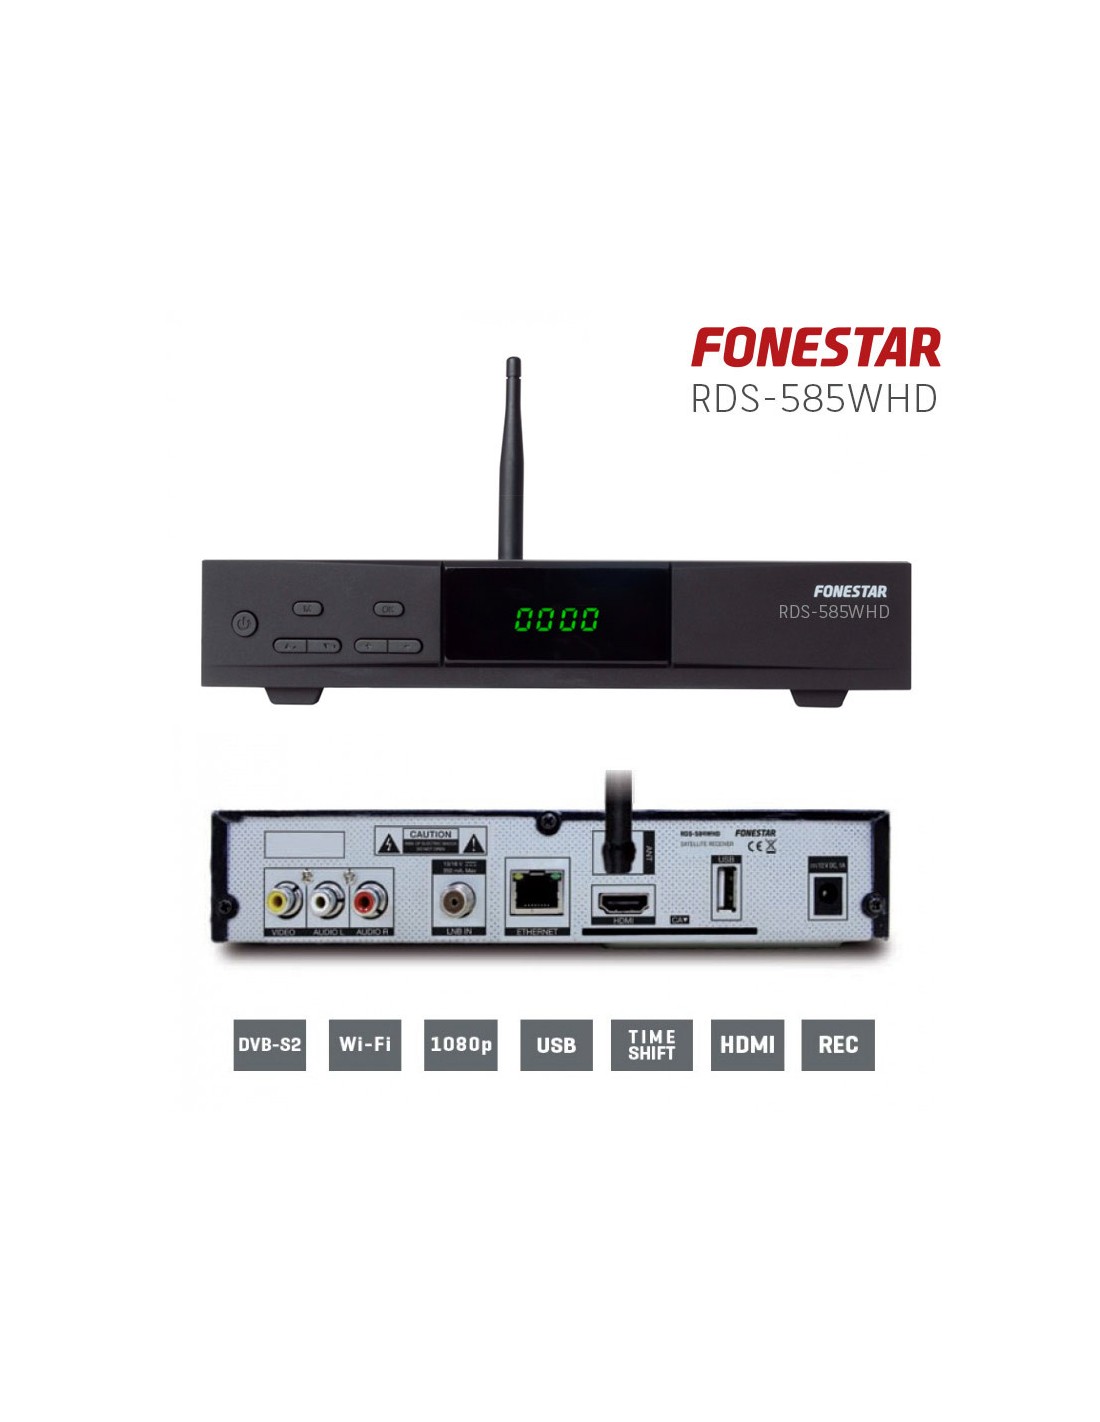 7498_333rds584whd_receptor-satelite-hd-fonestar-rds-584whd